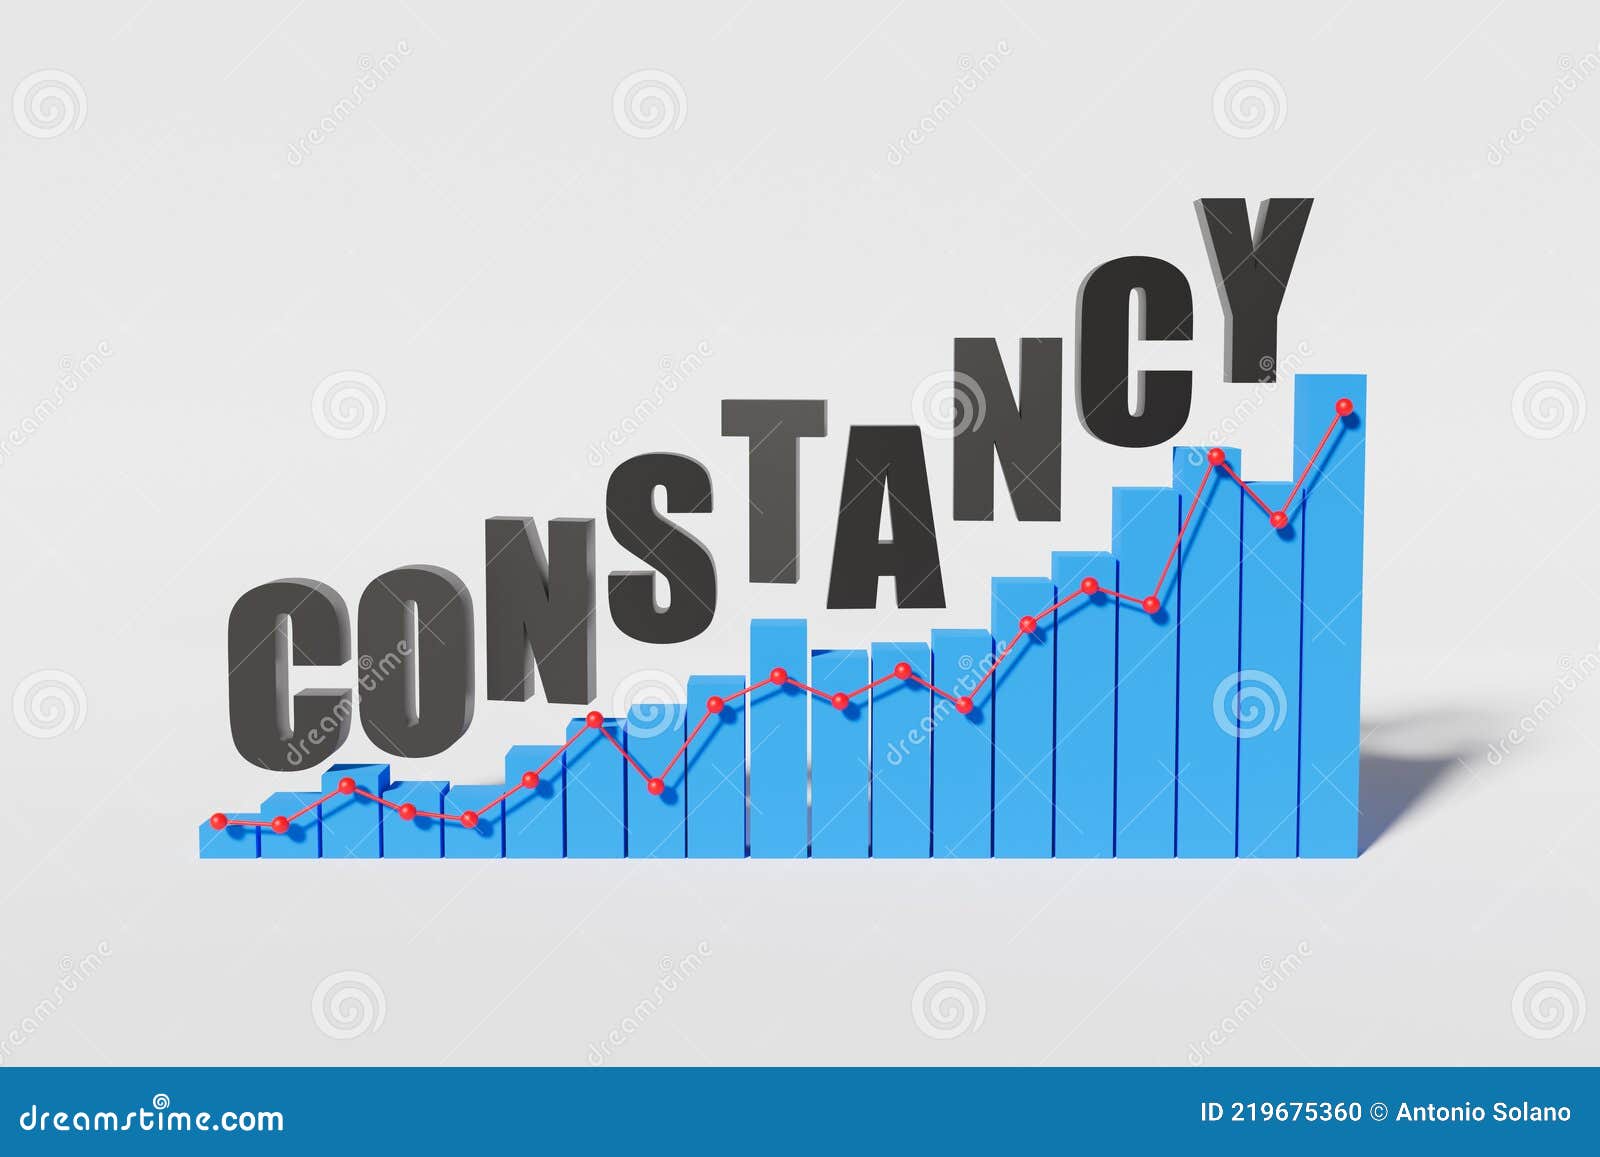 ascending graph. concept of constancy and success